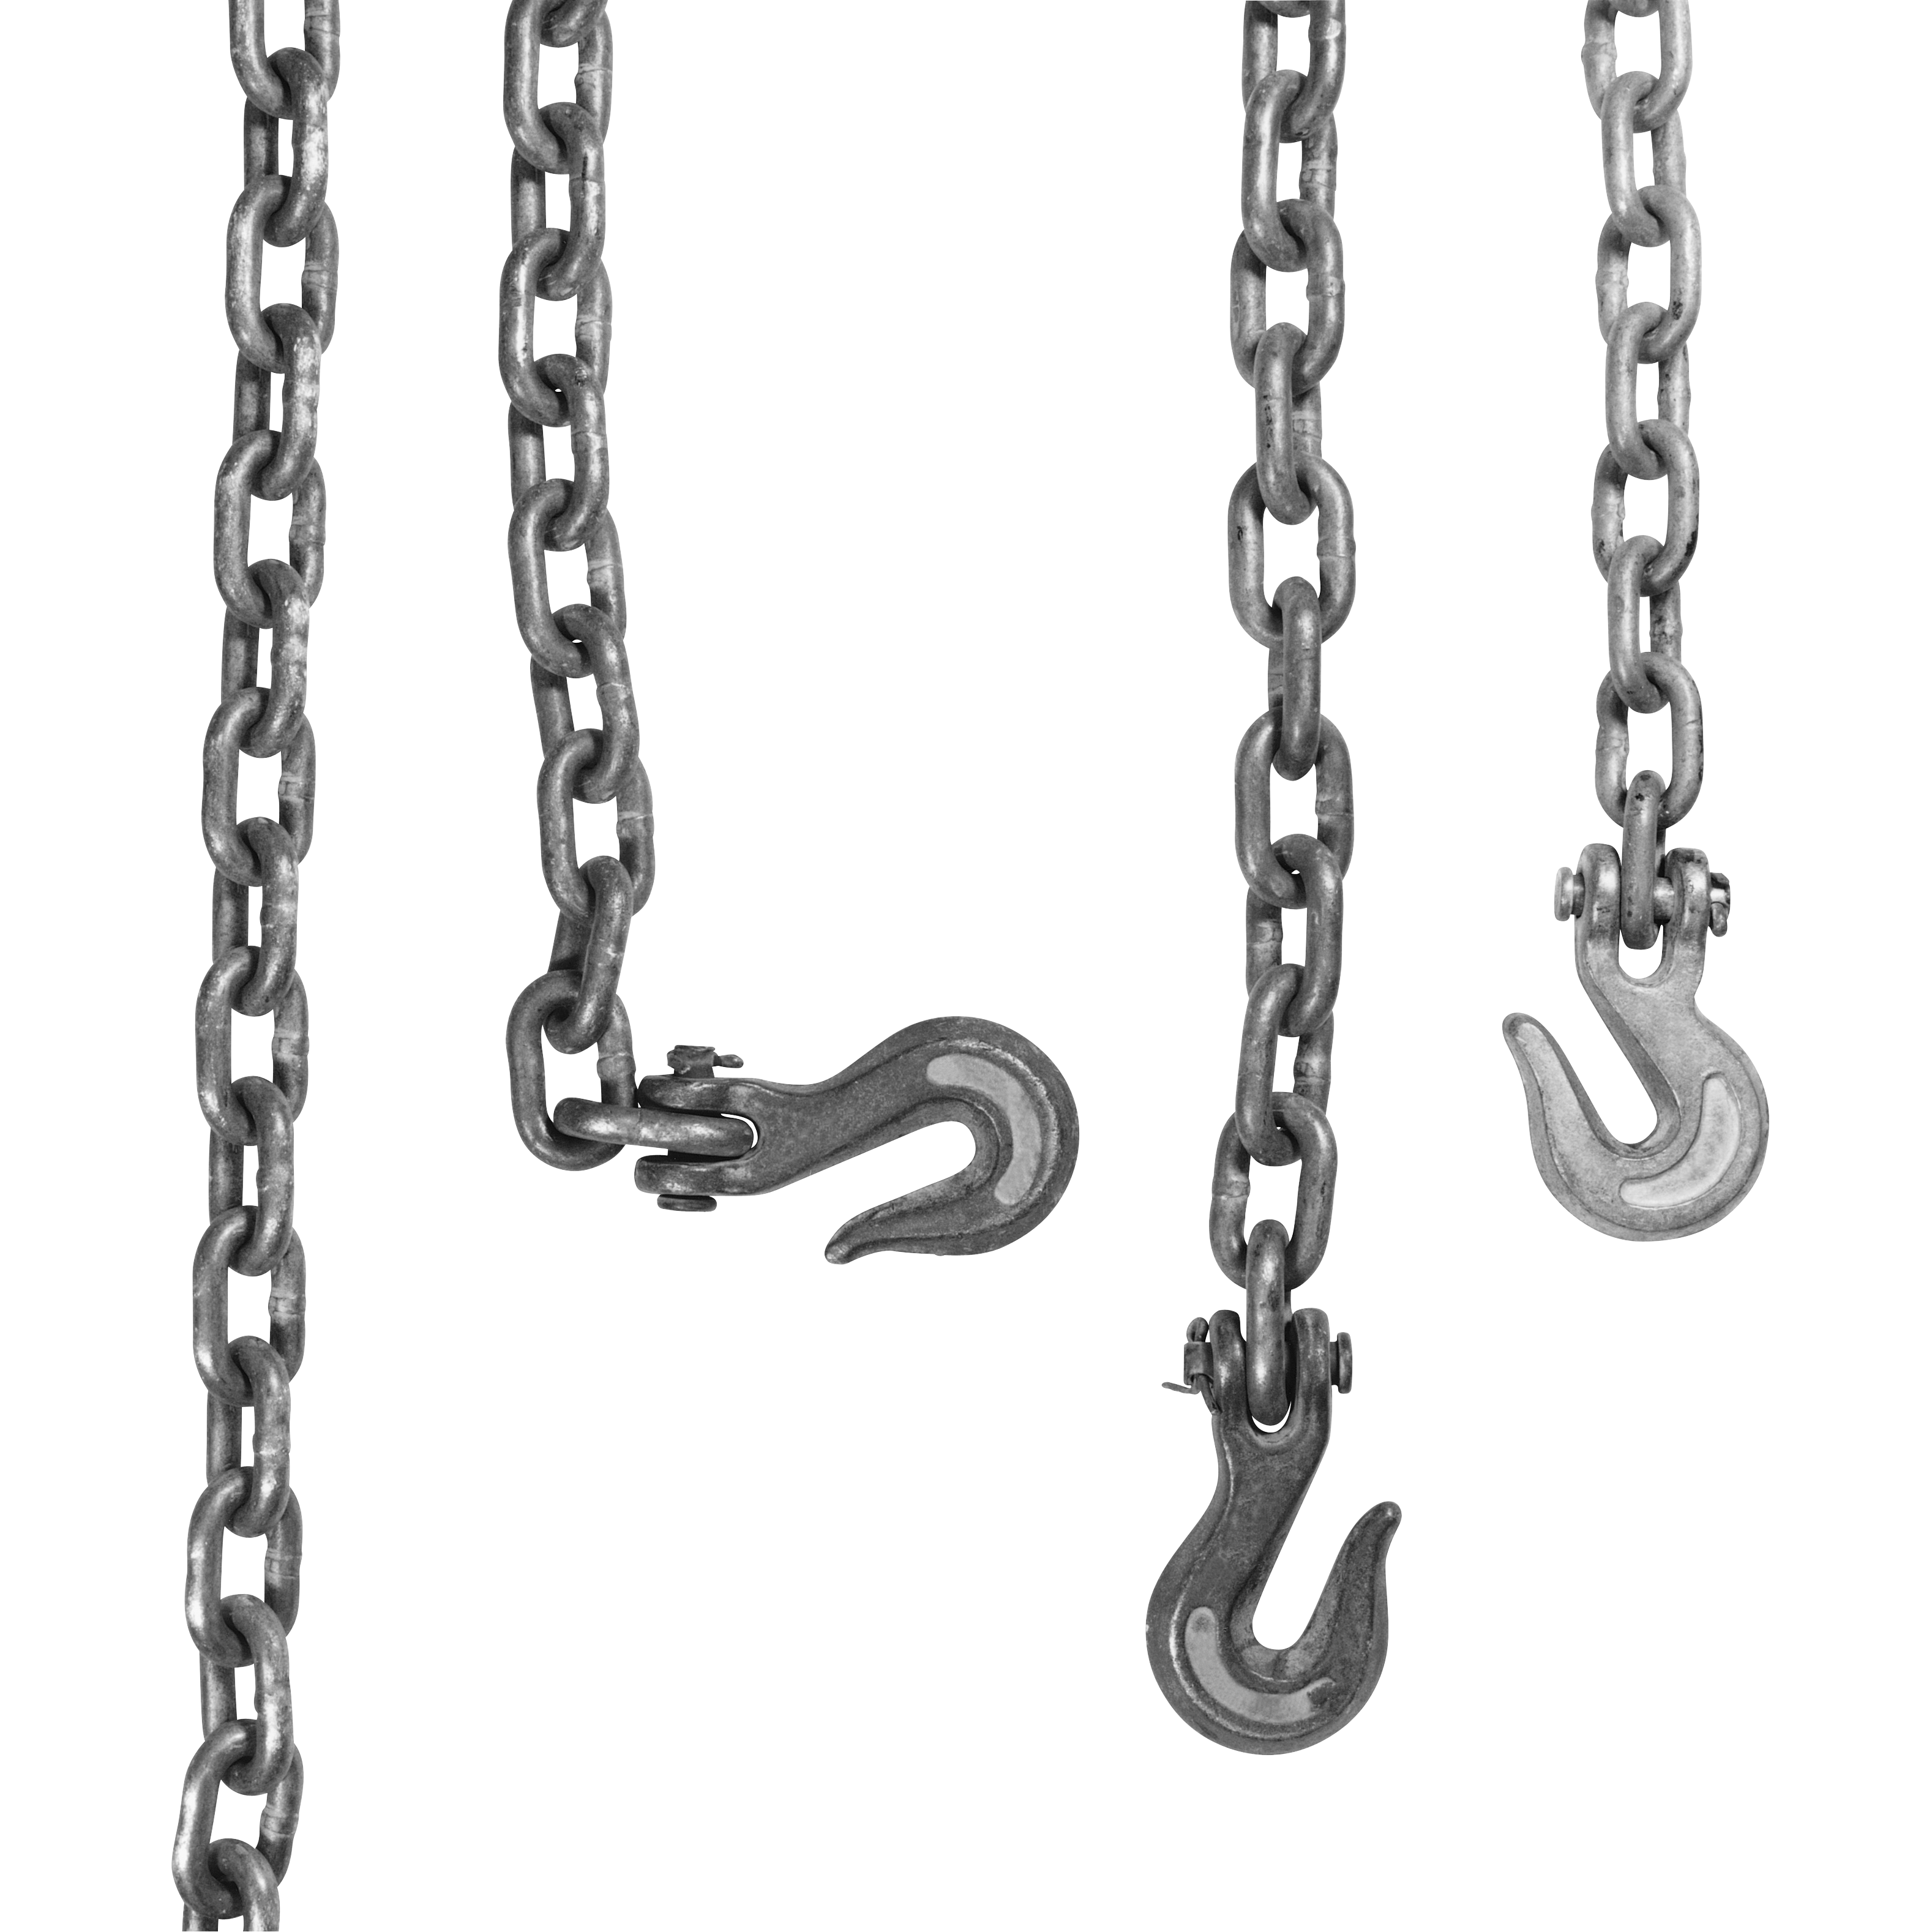 Chain PNG Transparent Images | PNG All